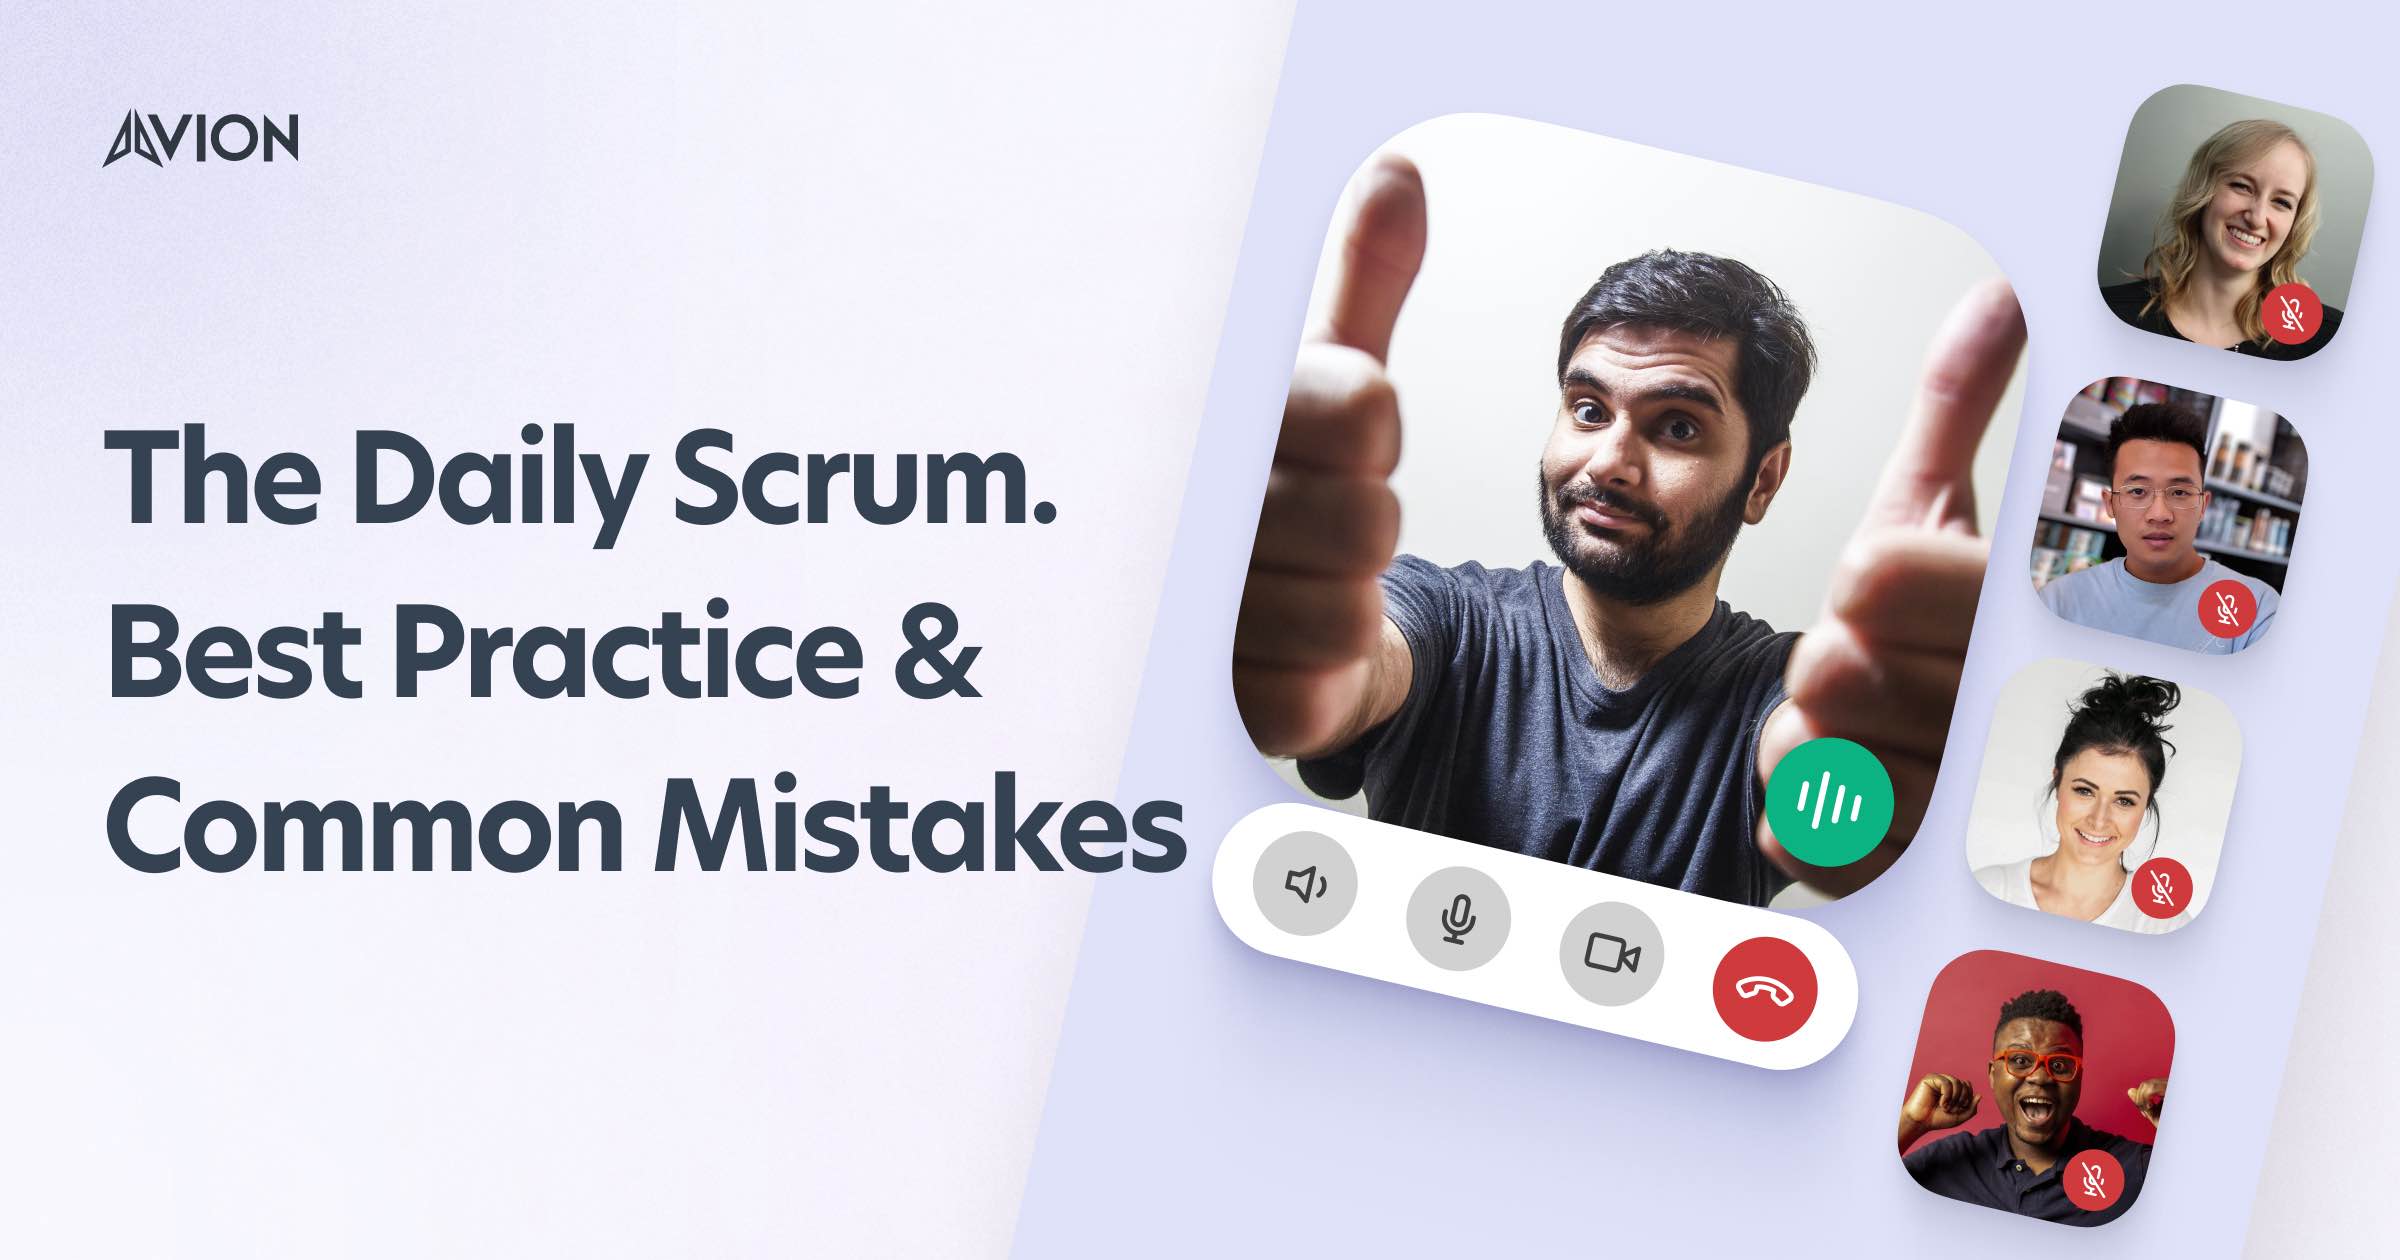 The Daily Scrum — Checklist, Best Practice & Common Mistakes